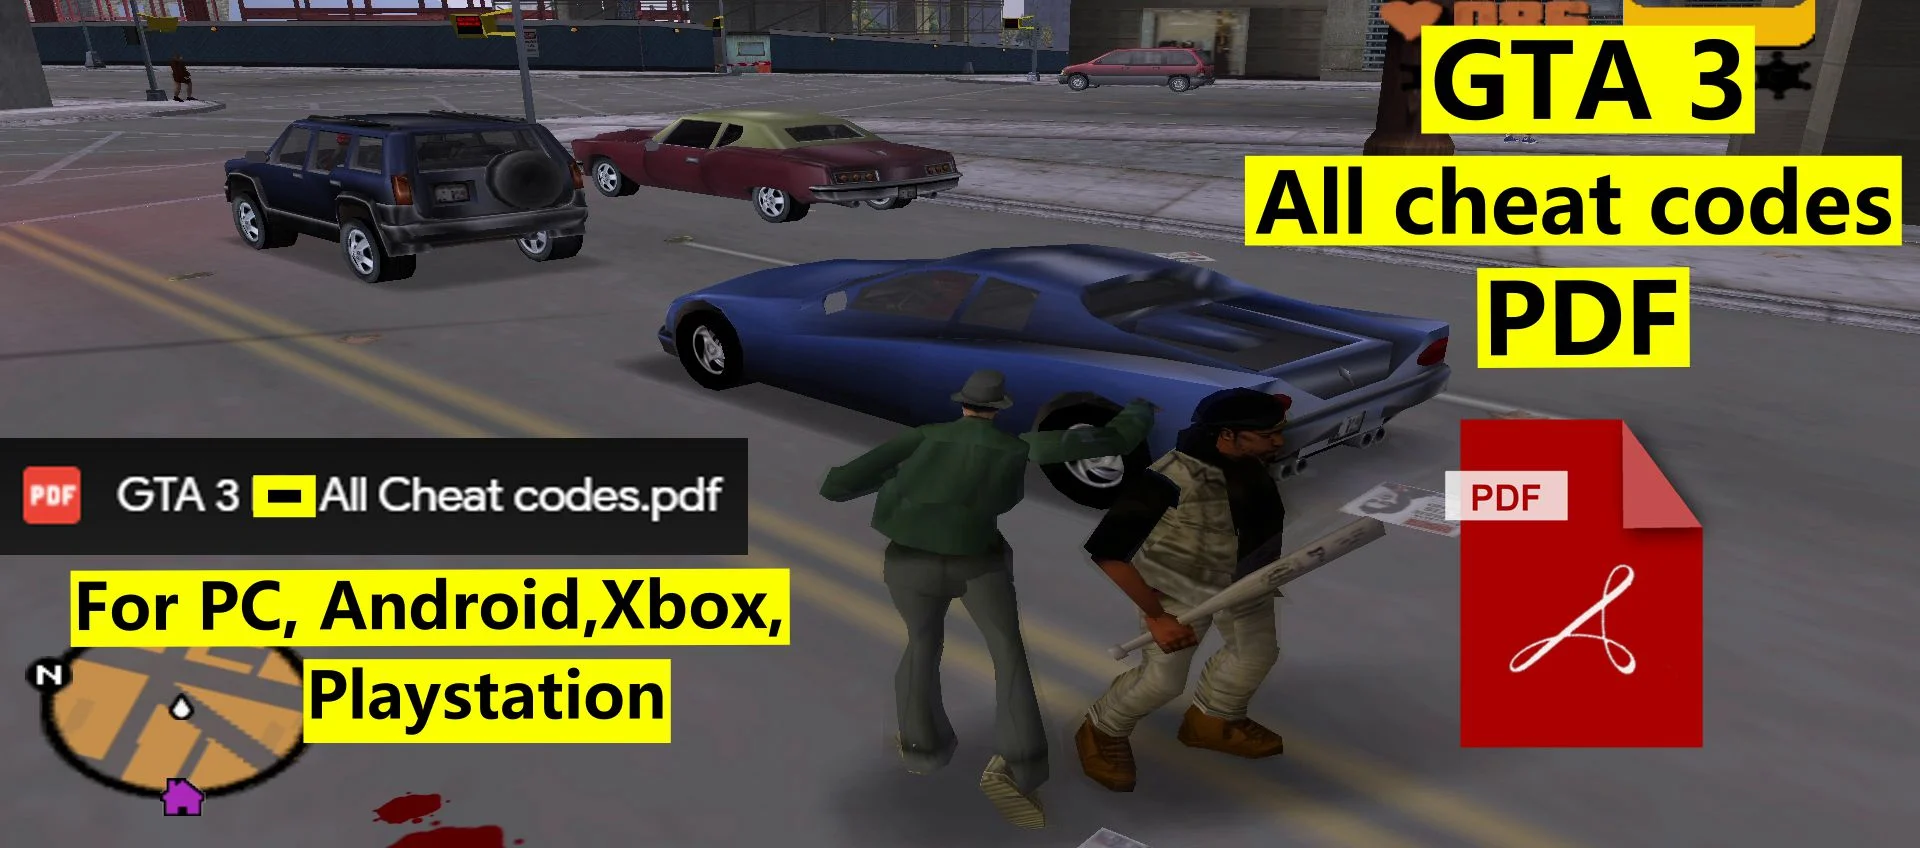 GTA 3 cheat codes: all weapons, money, cars, and more